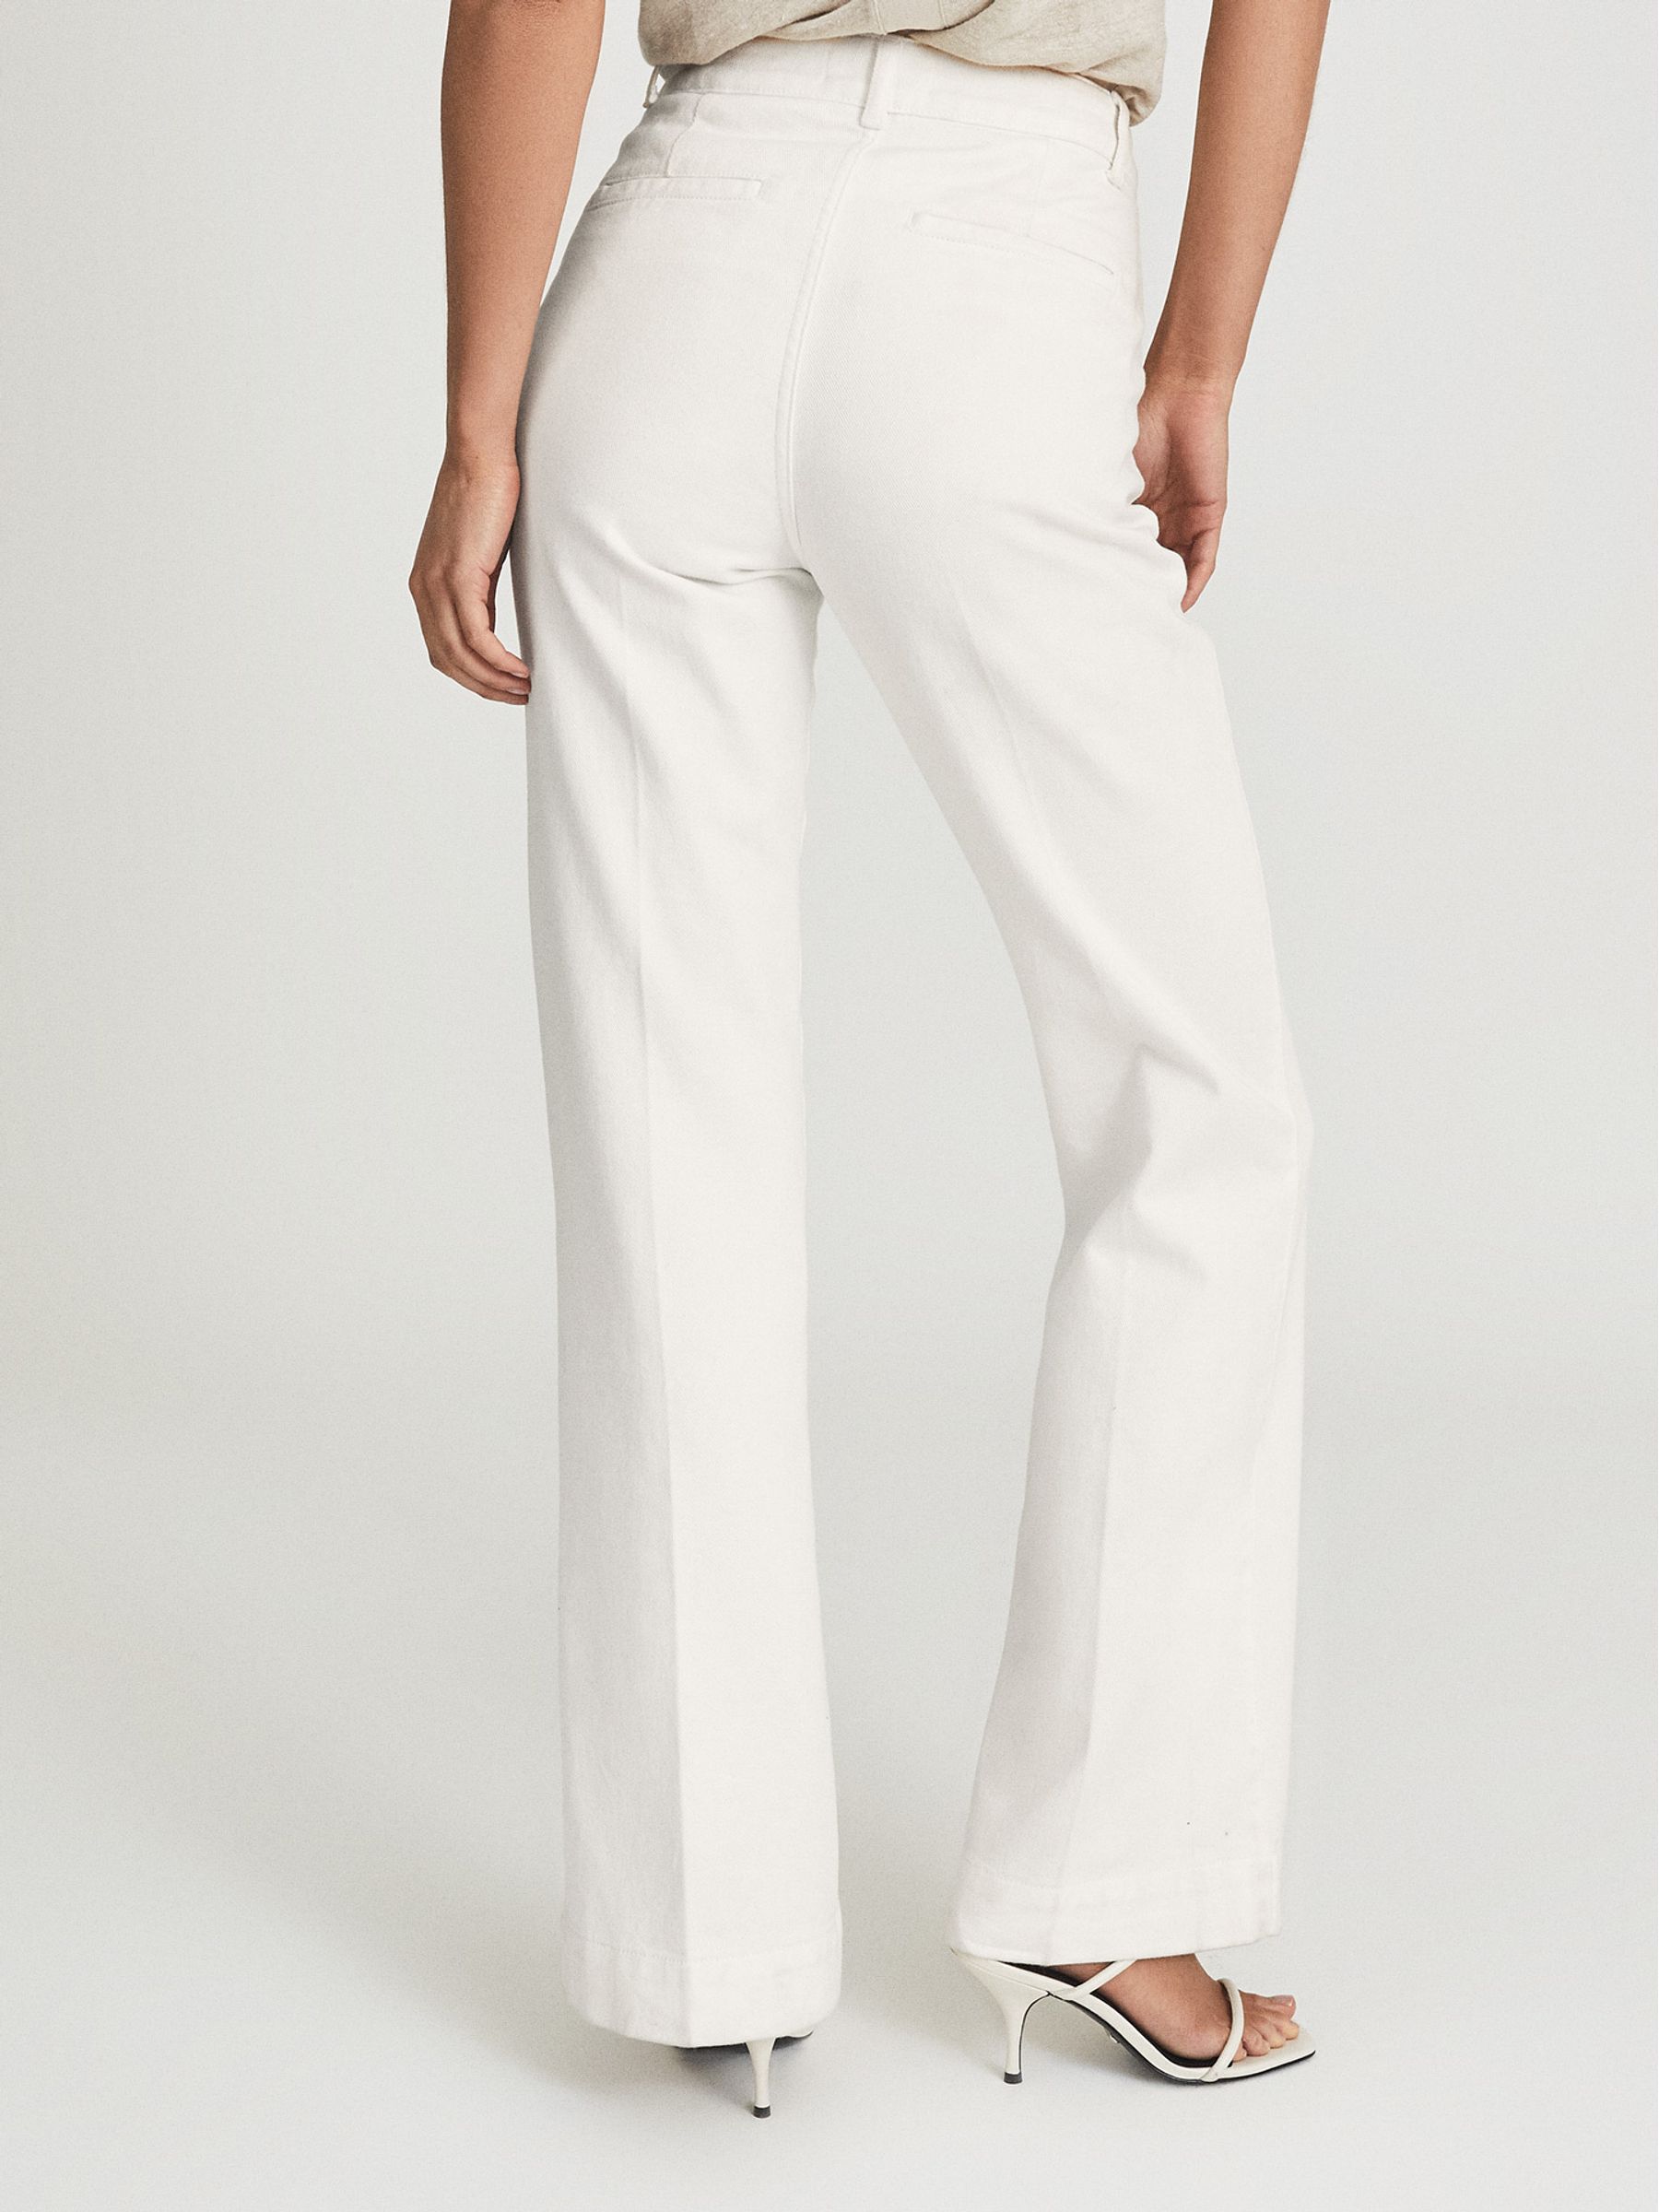 Reiss Isa High Rise Flared Jeans - REISS